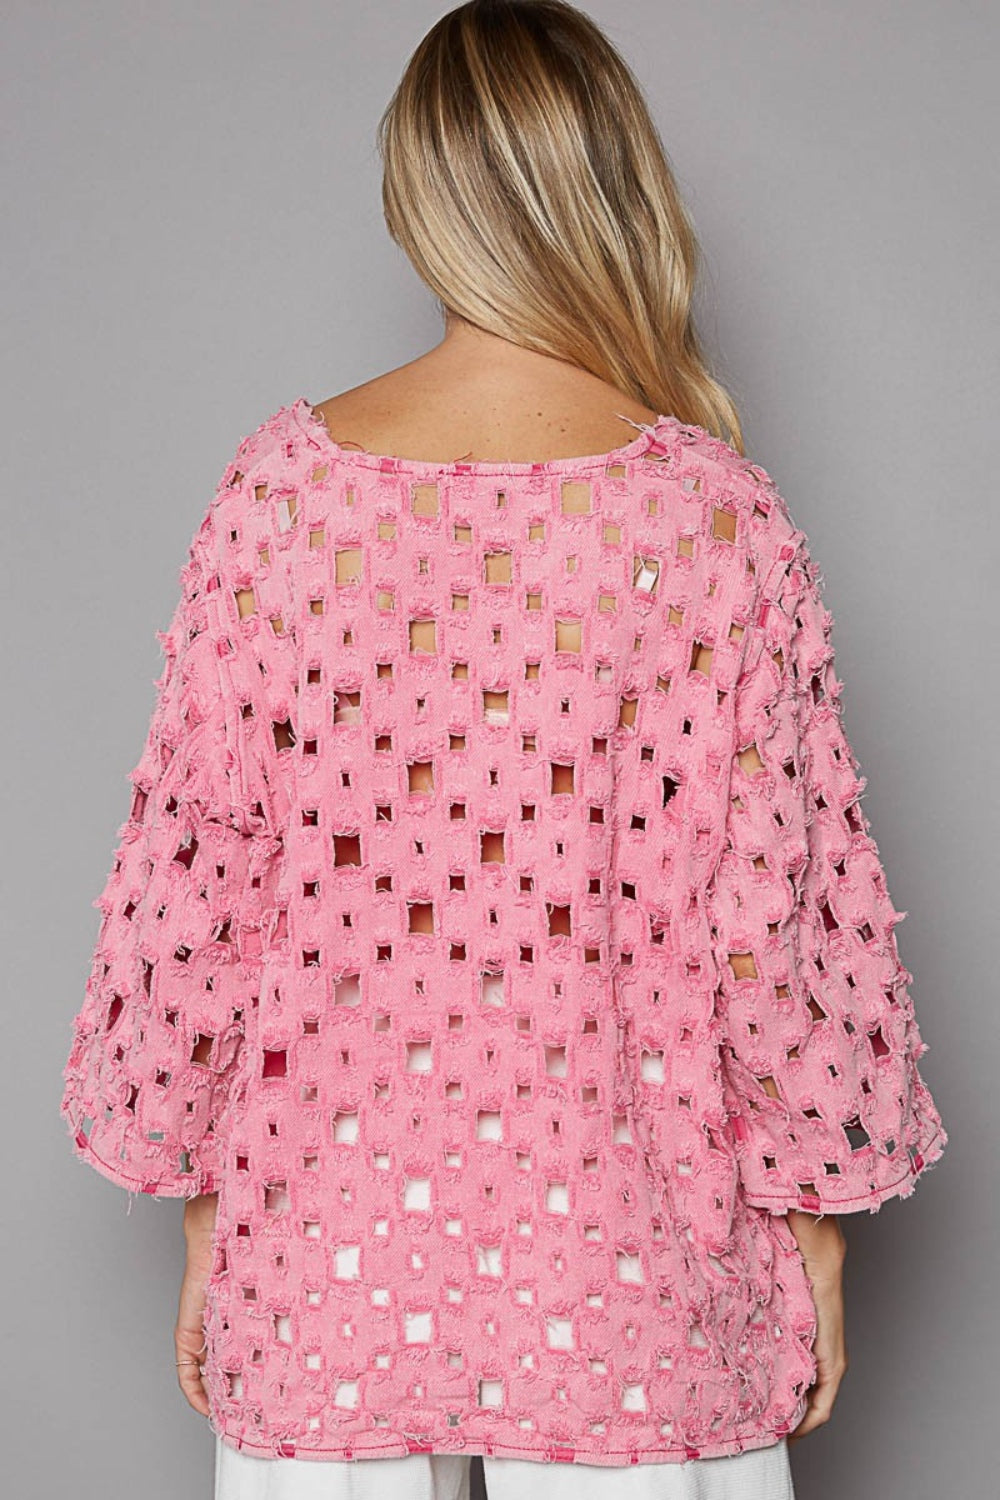 Distressed Openwork Top in Punch Pink